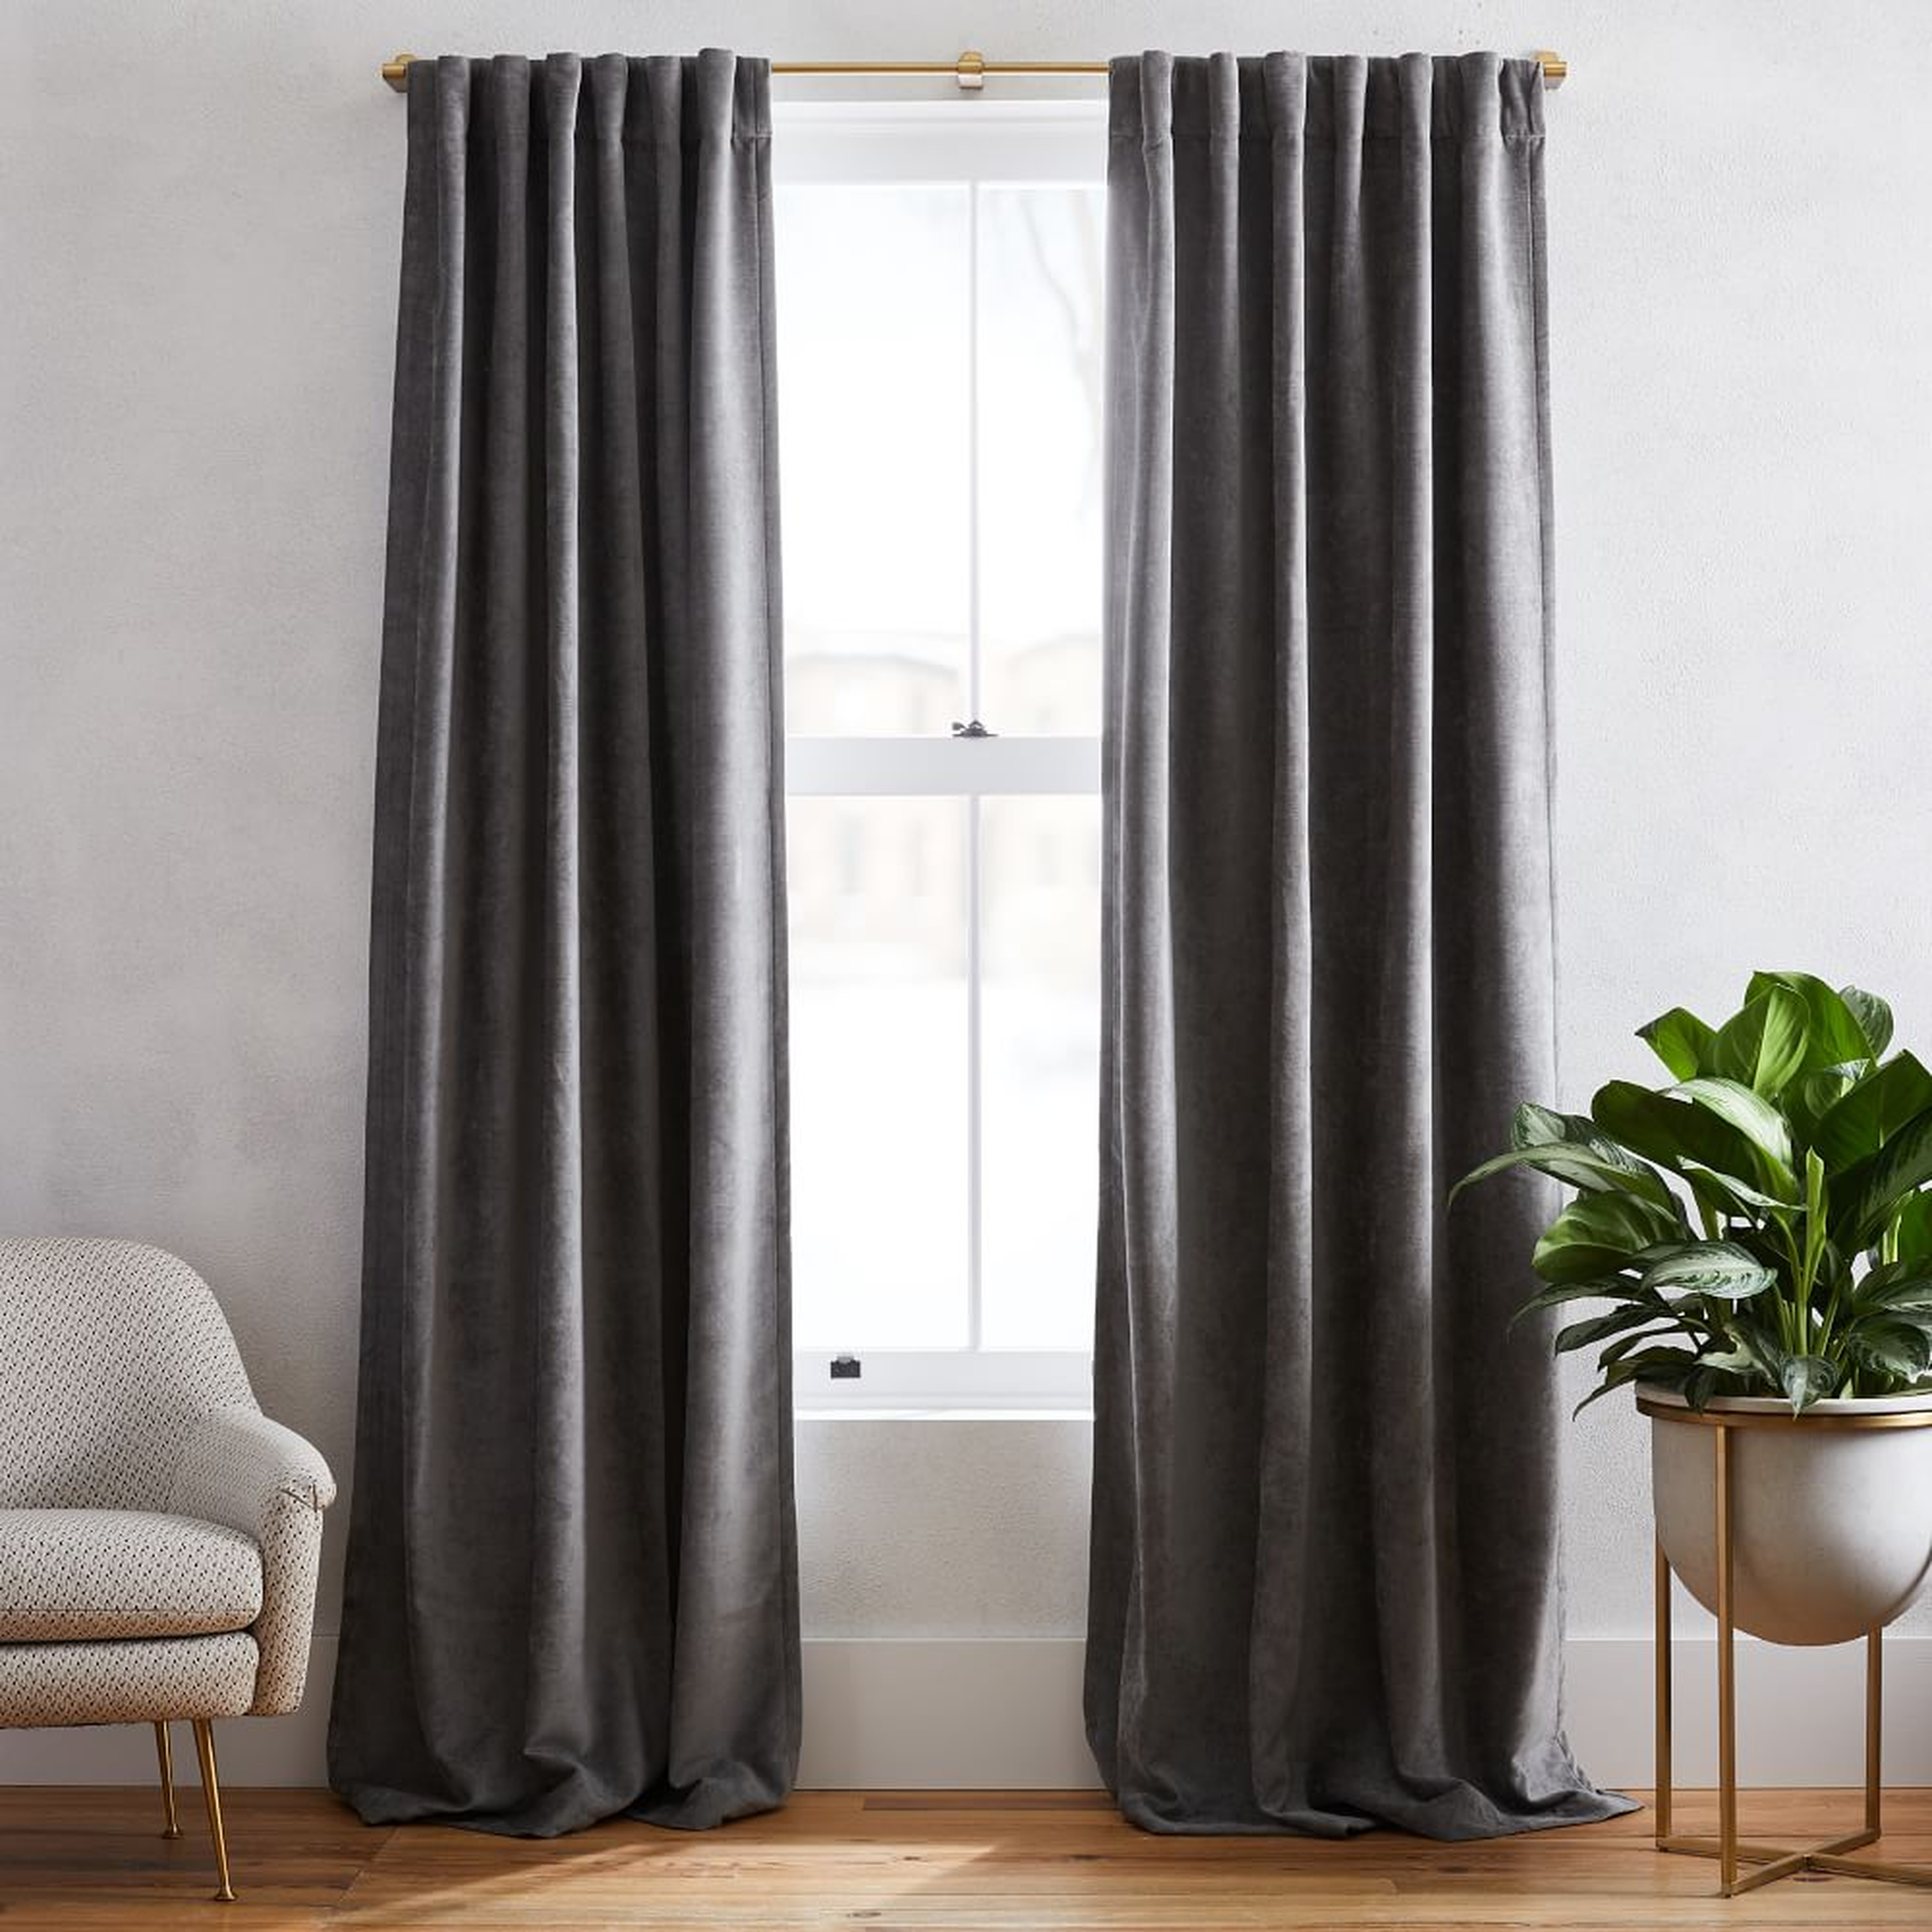 Worn Velvet Curtain with Blackout Lining, Metal, 48"x96", Set of 2 - West Elm